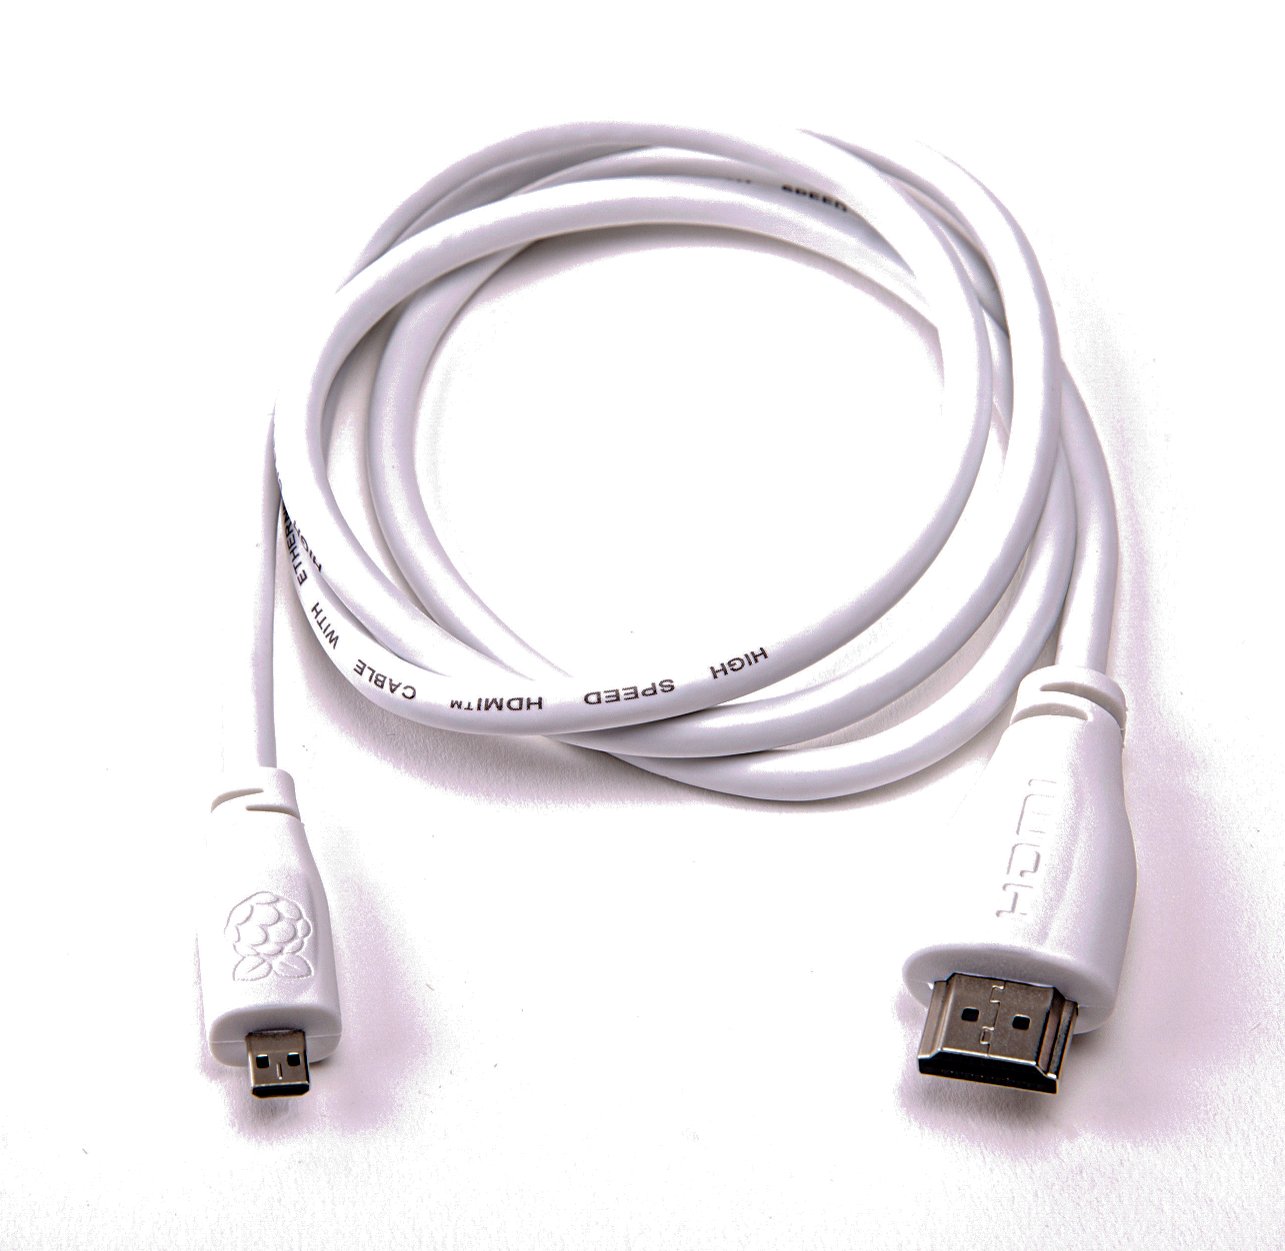 Official Raspberry Pi Micro HDMI to Standard HDMI (A/M) Cable- 1m, White